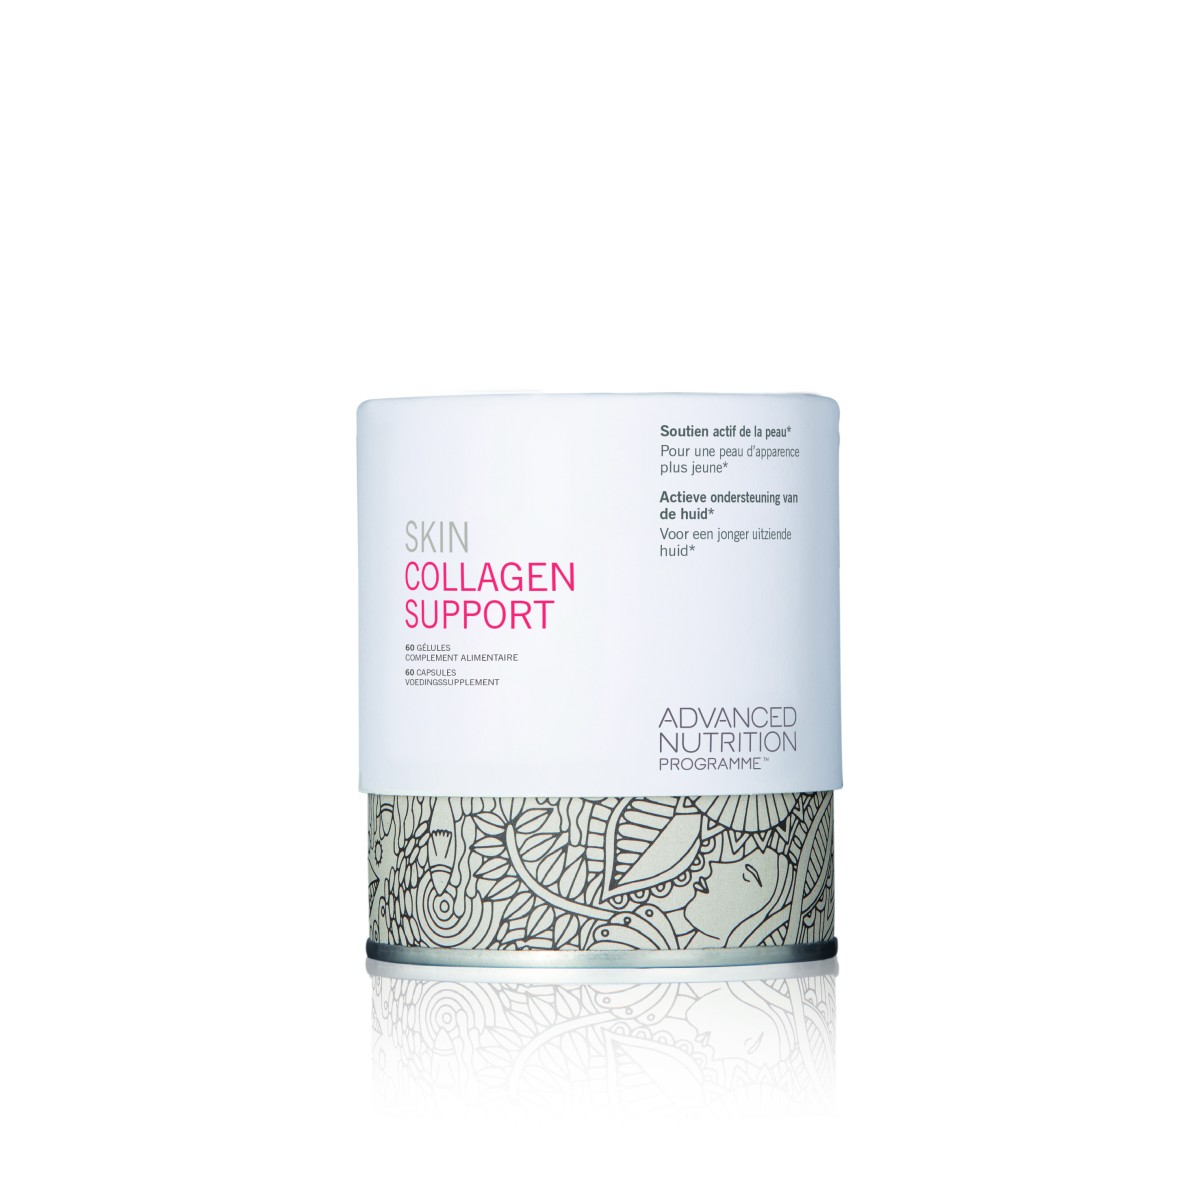 Advanced-Nutrition-Programme-Product-Image-BNL-Skin-Collagen-Support-60